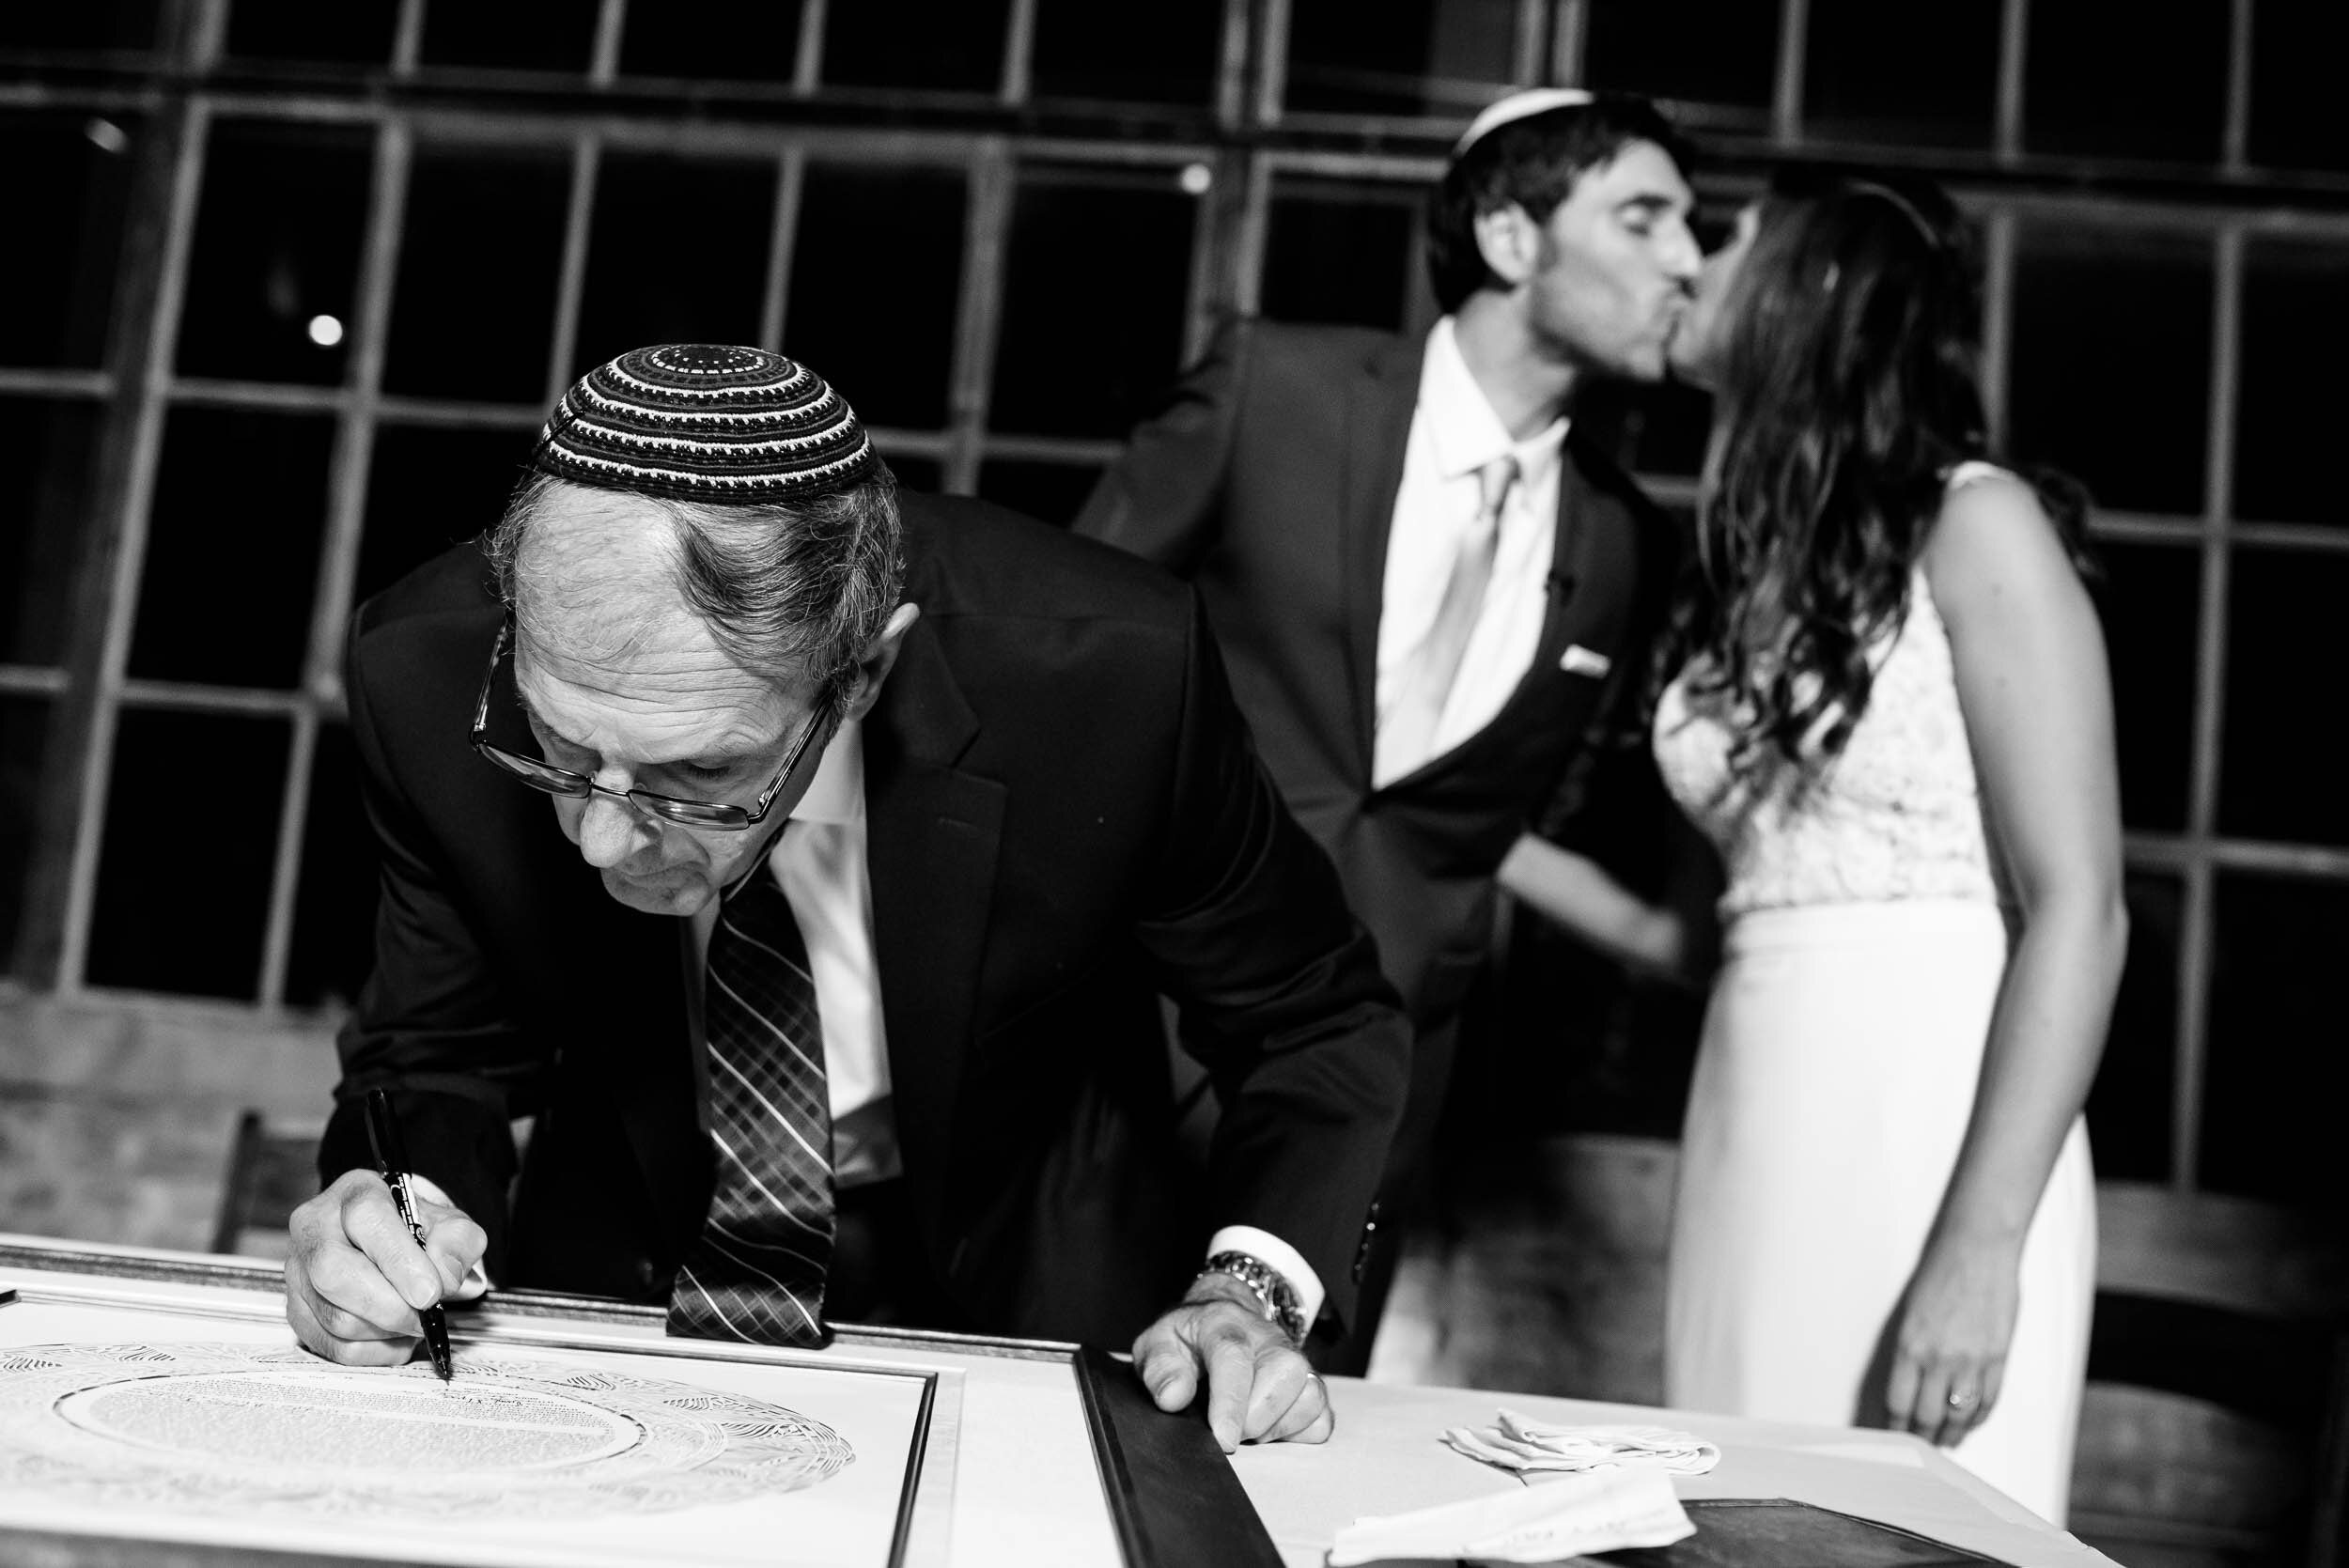 Couple kisses during their ketubah signing: Ravenswood Event Center Chicago wedding captured by J. Brown Photography.  